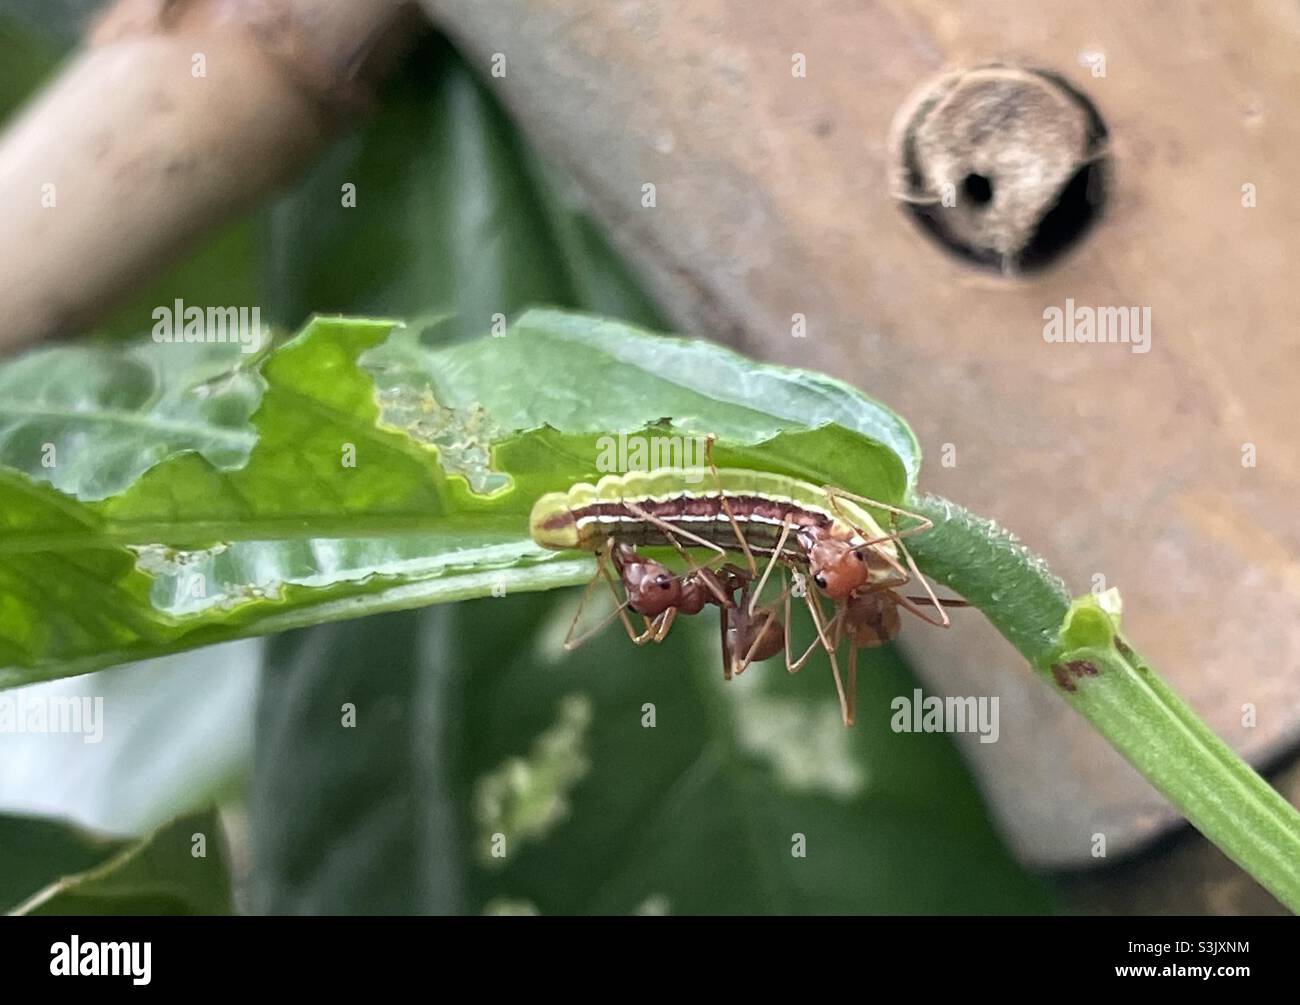 Symbiosis of weaver ants and larva of lycaenid butterfly found on long bean plant in Malaysia. Stock Photo